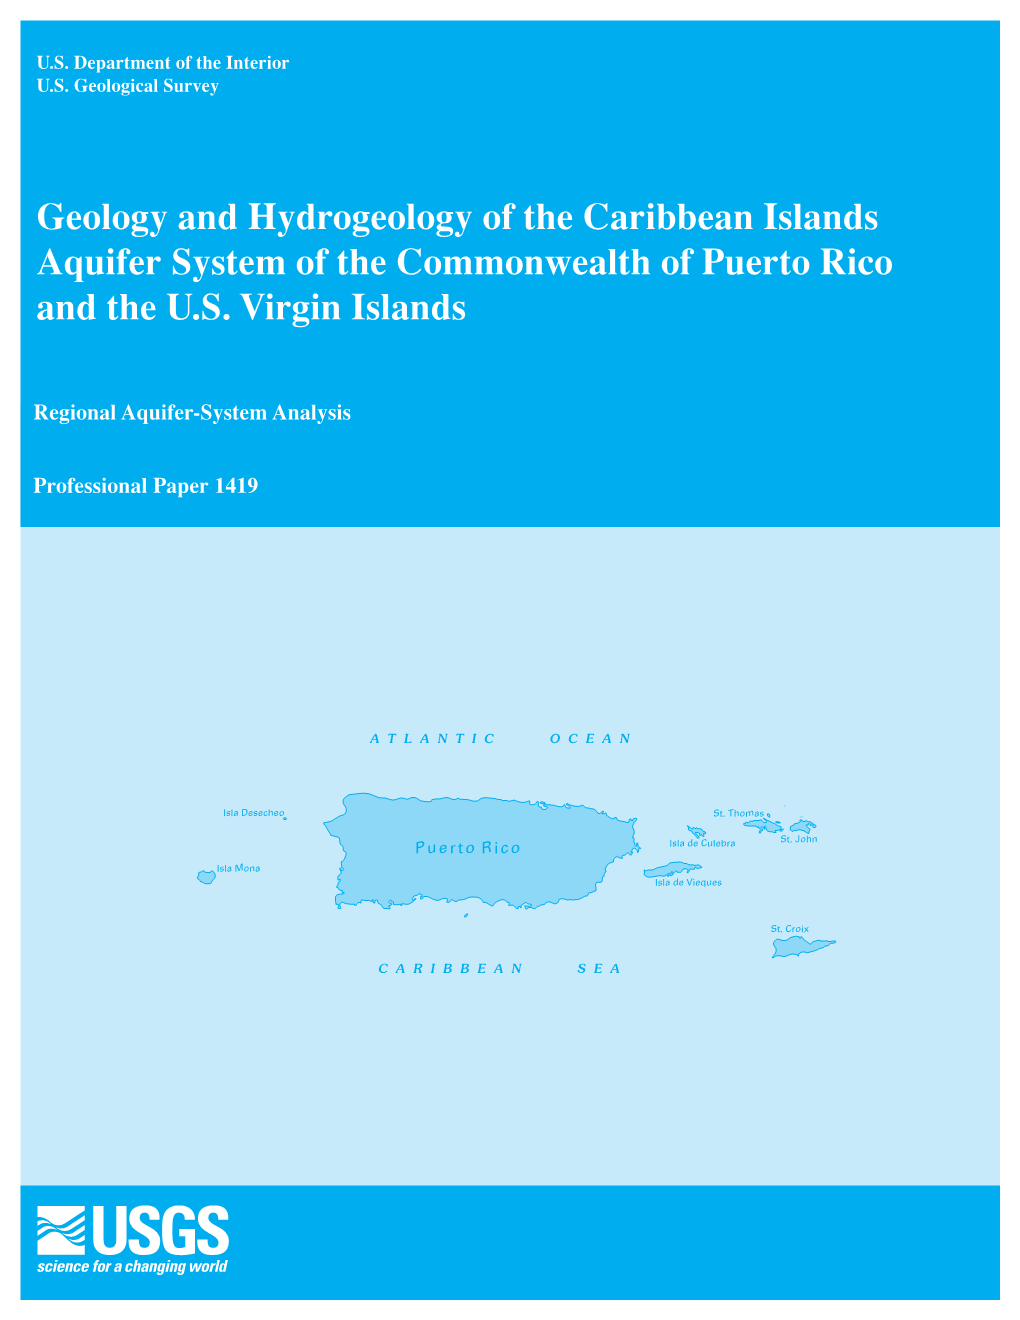 Geology and Hydrogeology of the Caribbean Islands Aquifer System of the Commonwealth of Puerto Rico and the U.S